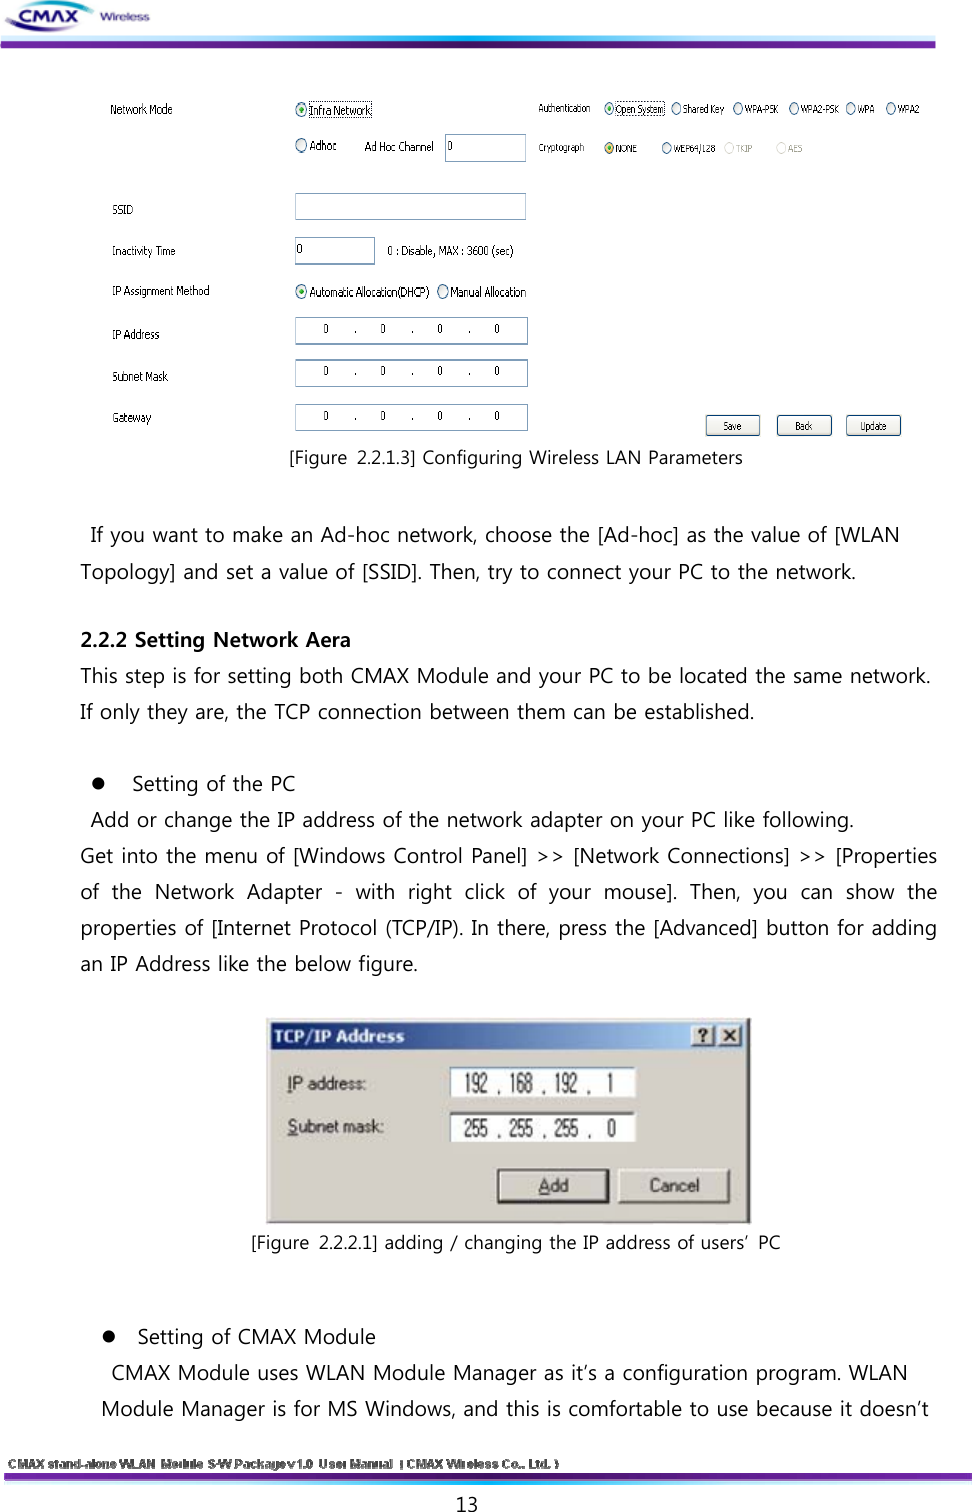   13   [Figure 2.2.1.3] Configuring Wireless LAN Parameters  If you want to make an Ad-hoc network, choose the [Ad-hoc] as the value of [WLAN Topology] and set a value of [SSID]. Then, try to connect your PC to the network.    2.2.2 Setting Network Aera   This step is for setting both CMAX Module and your PC to be located the same network. If only they are, the TCP connection between them can be established.     Setting of the PC   Add or change the IP address of the network adapter on your PC like following.   Get into the menu of [Windows Control Panel] &gt;&gt; [Network Connections] &gt;&gt; [Properties of the Network Adapter - with right click of your mouse]. Then, you can show the properties of [Internet Protocol (TCP/IP). In there, press the [Advanced] button for adding an IP Address like the below figure.   [Figure 2.2.2.1] adding / changing the IP address of users’  PC  Setting of CMAX Module   CMAX Module uses WLAN Module Manager as it’s a configuration program. WLAN Module Manager is for MS Windows, and this is comfortable to use because it doesn’t 